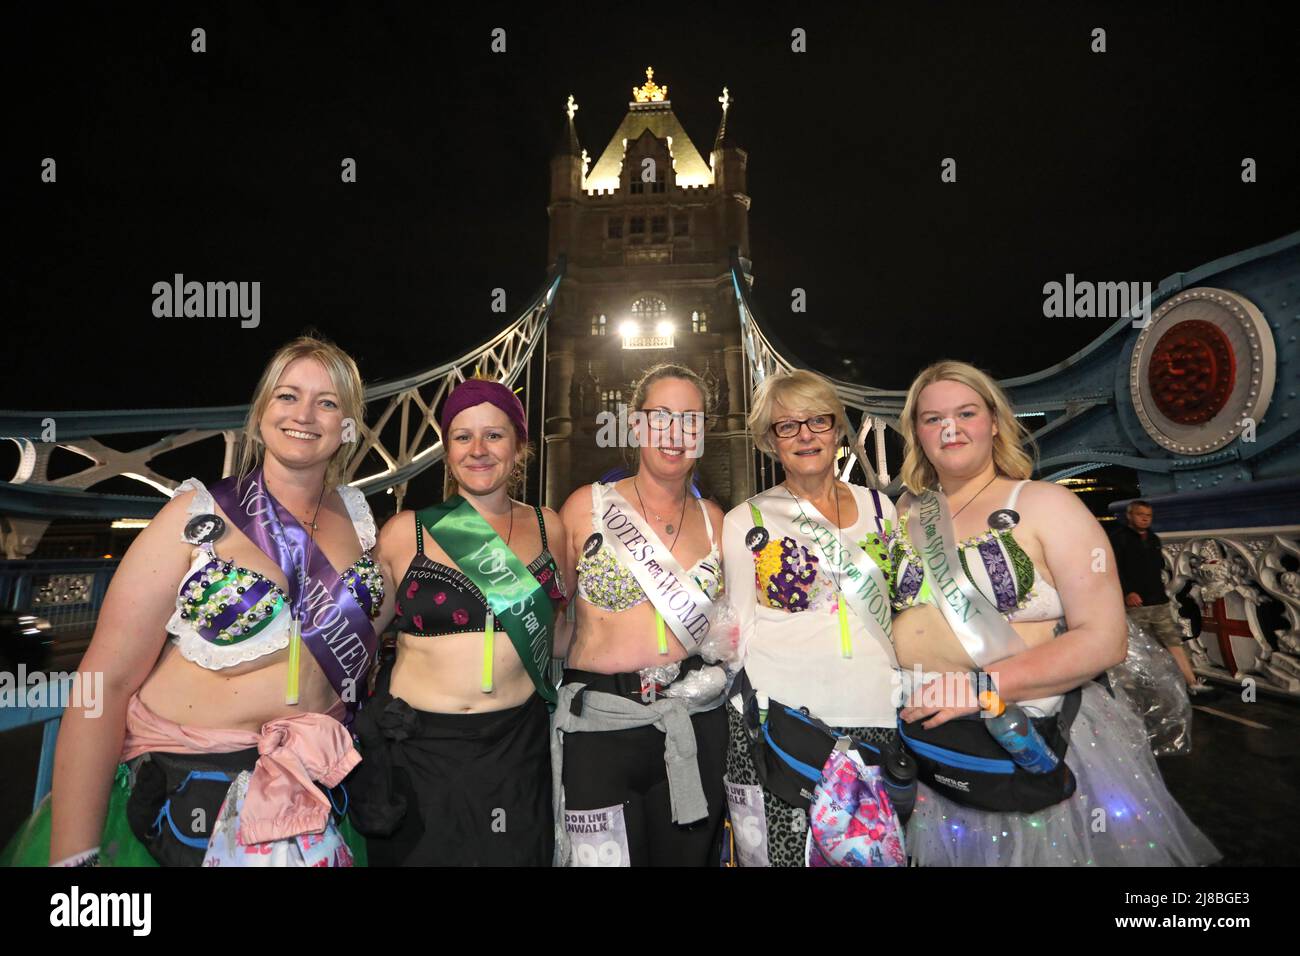 London, UK. 14th May 2022. London, UK. Participants honouring their suffragette heroes by wearing Votes for Women costumes on Tower Bridge at the Walk the Walk Moonwalk walking through London wearing decorated bras fundraising for breast cancer charities doing a marathon overnight. This year the theme is 'Your Heroes' and there were numerous rainbow themed costumes and bras in support of NHS heroes, also many superhero costumes and even blue and yellow Ukranian flag themed costumes in support of Ukrainian heroes. Credit: Paul Brown/Alamy Live News Stock Photo